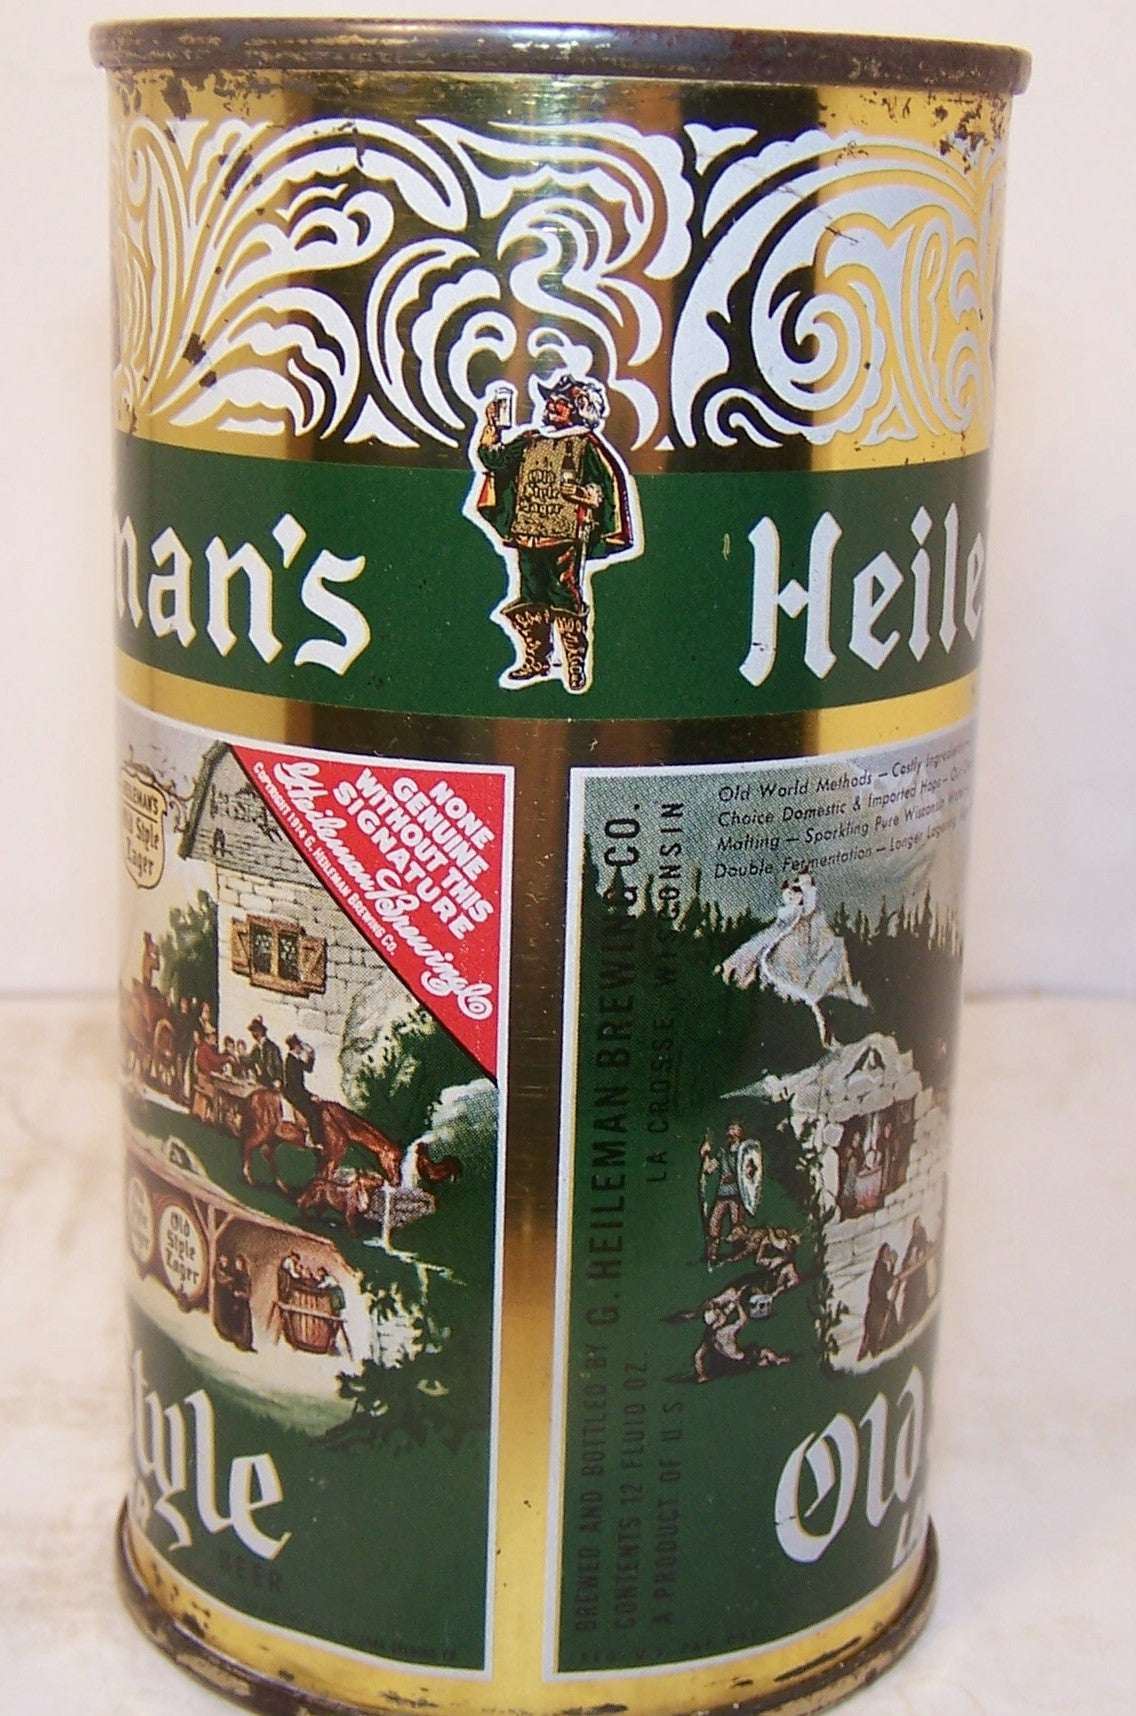 Heileman's Old Style Lager Beer, USBC 108-13, Grade 1 Sold 1/9/15